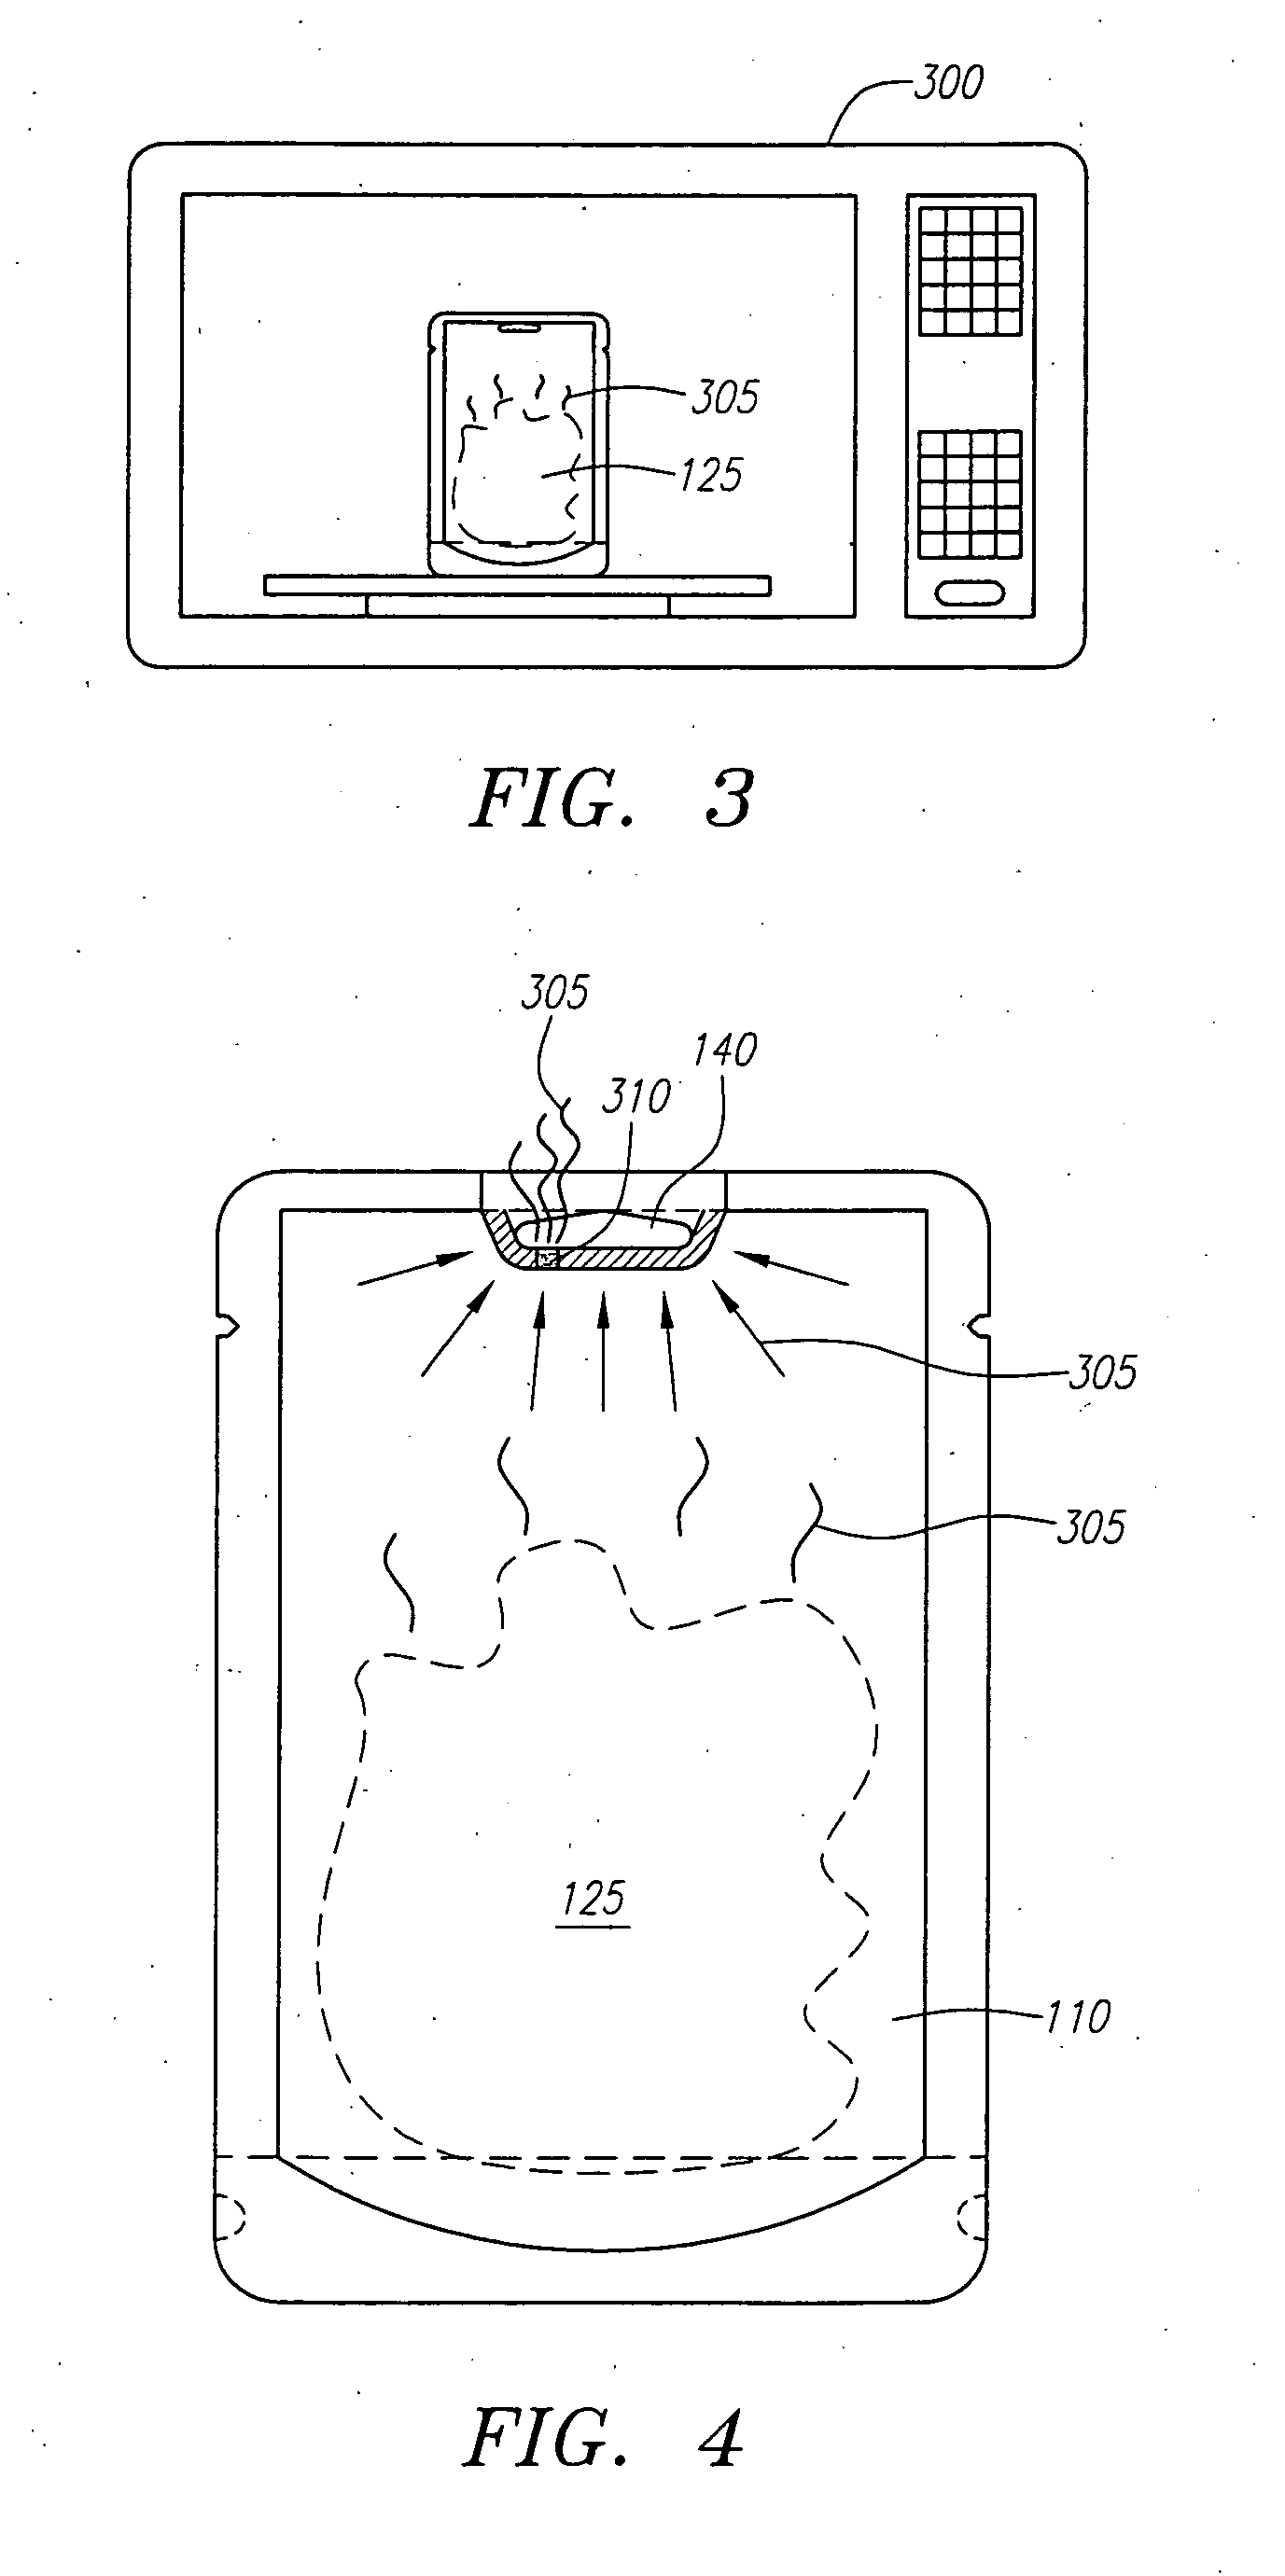 Self-venting microwaveable pouch, food item, and method of preparation